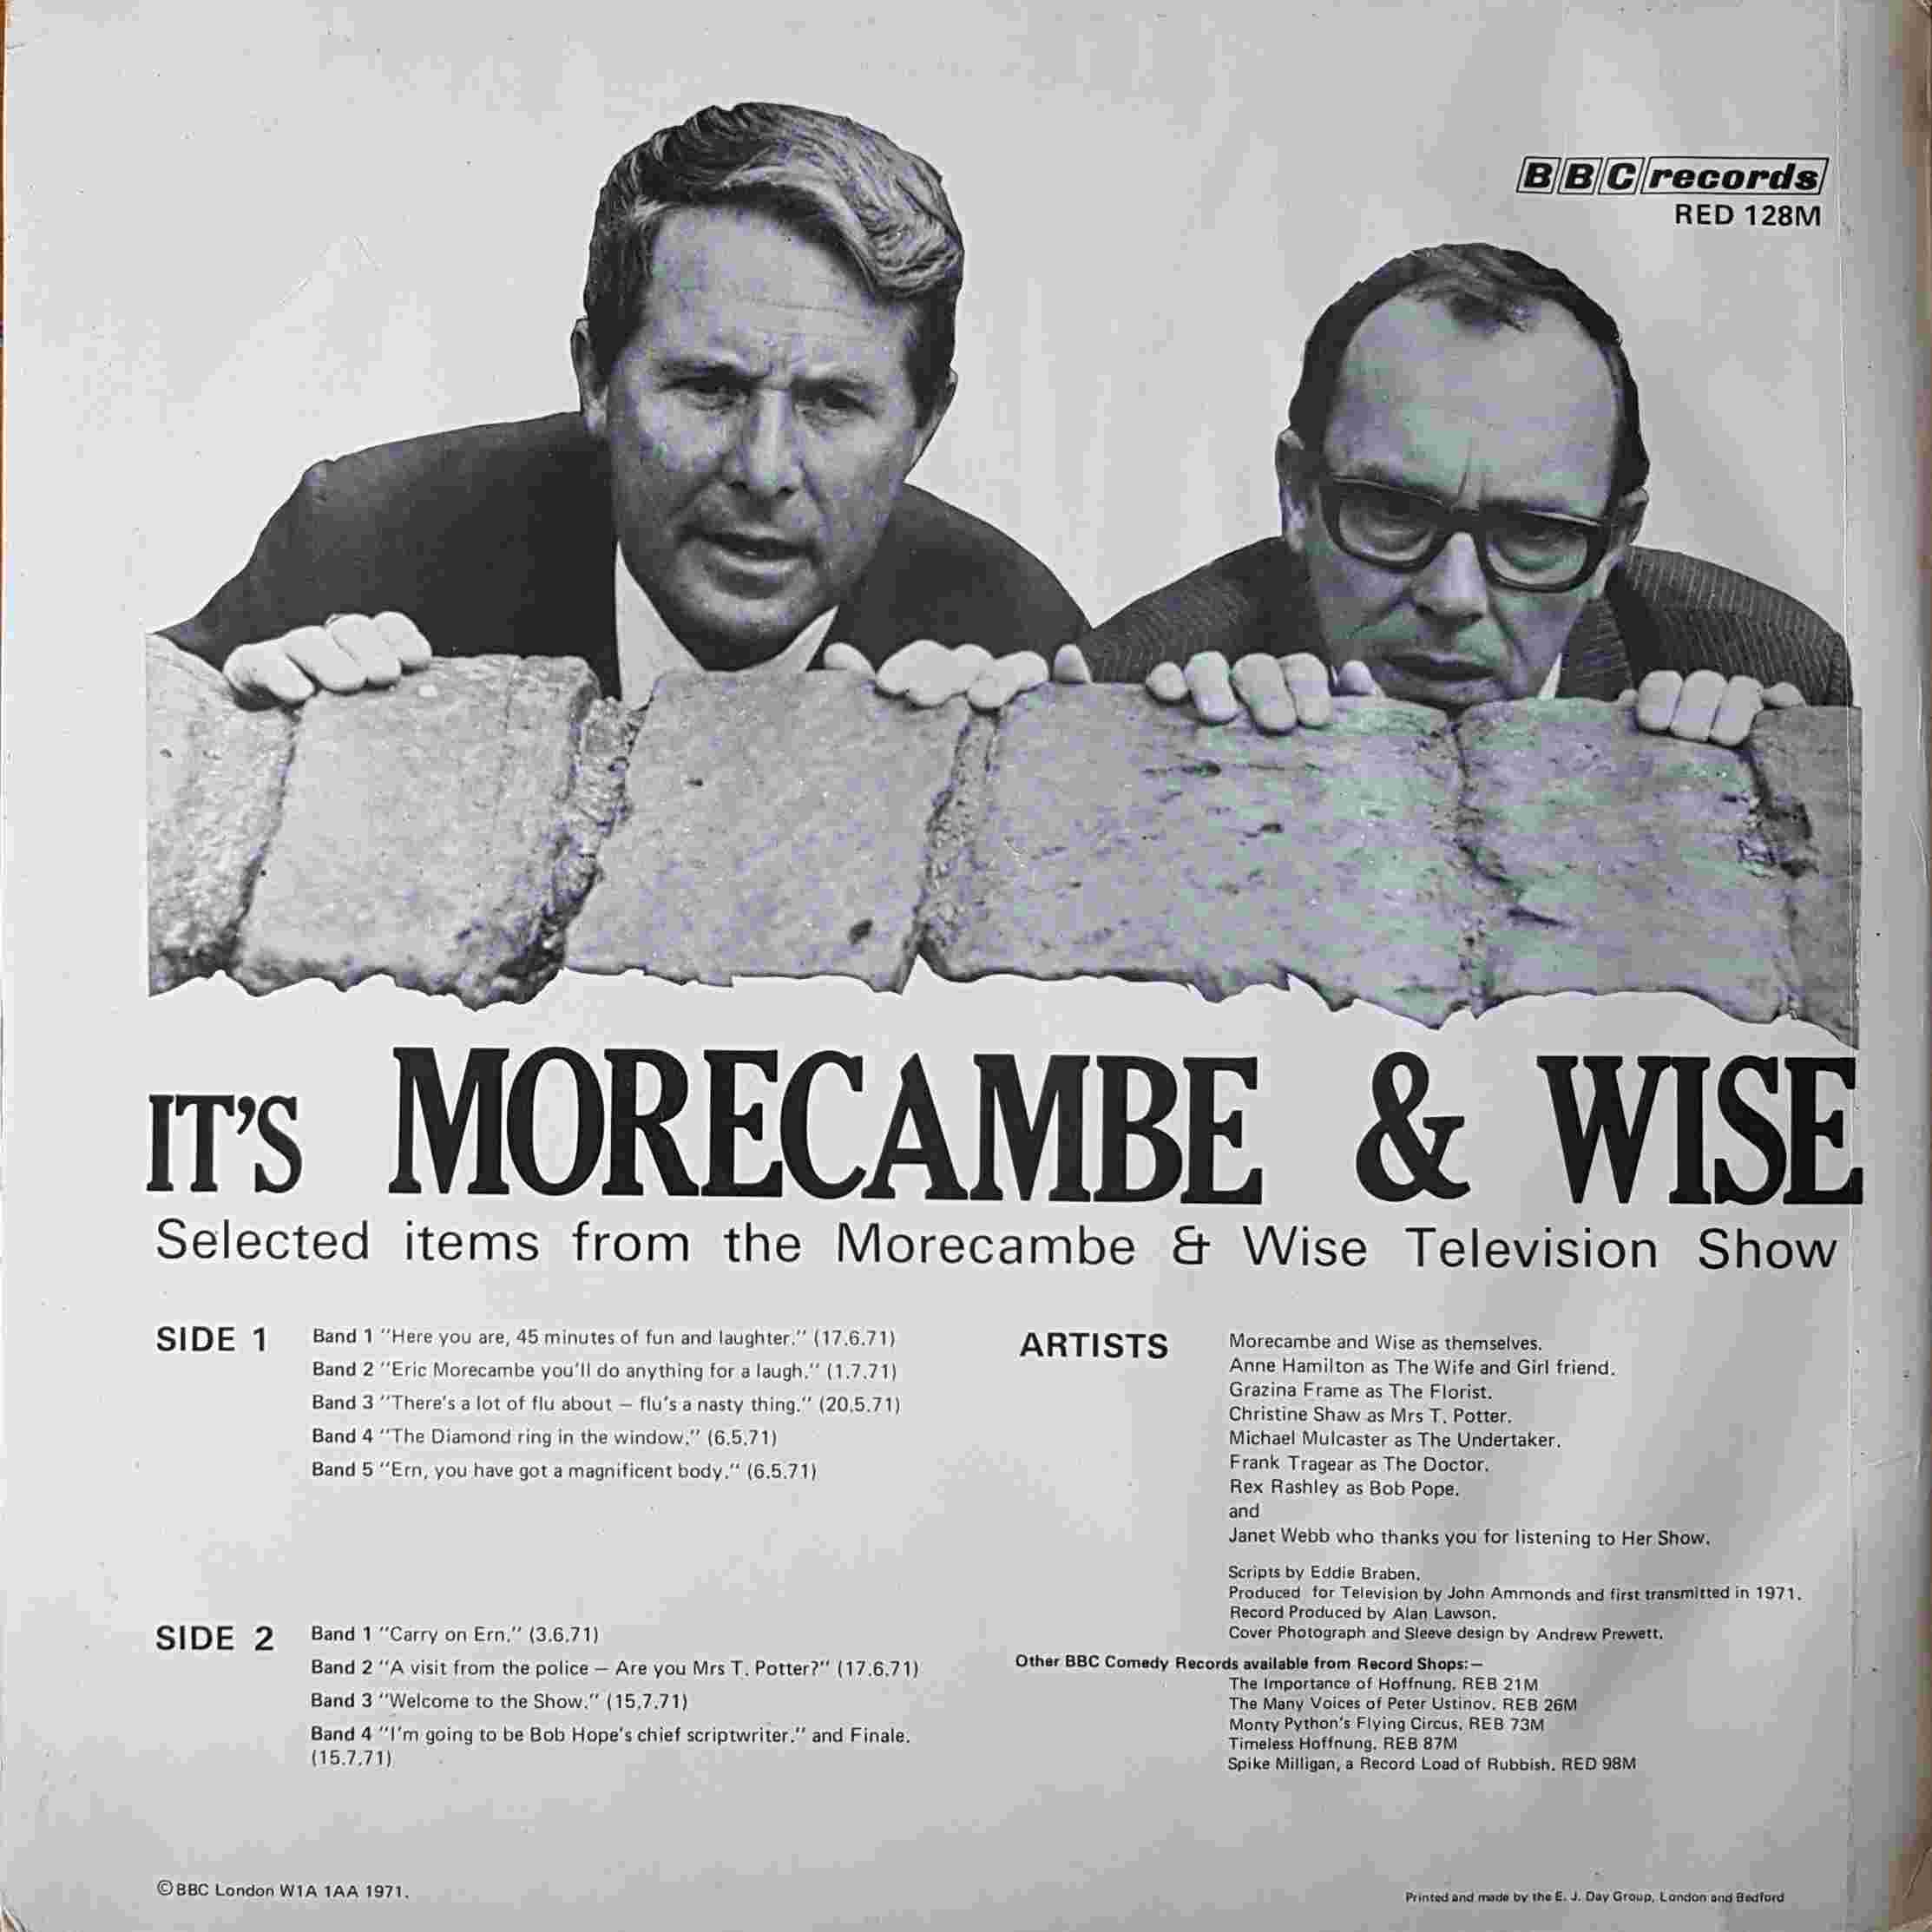 Picture of RED 128 Morecambe and Wise classics by artist Morecambe / Wise from the BBC records and Tapes library